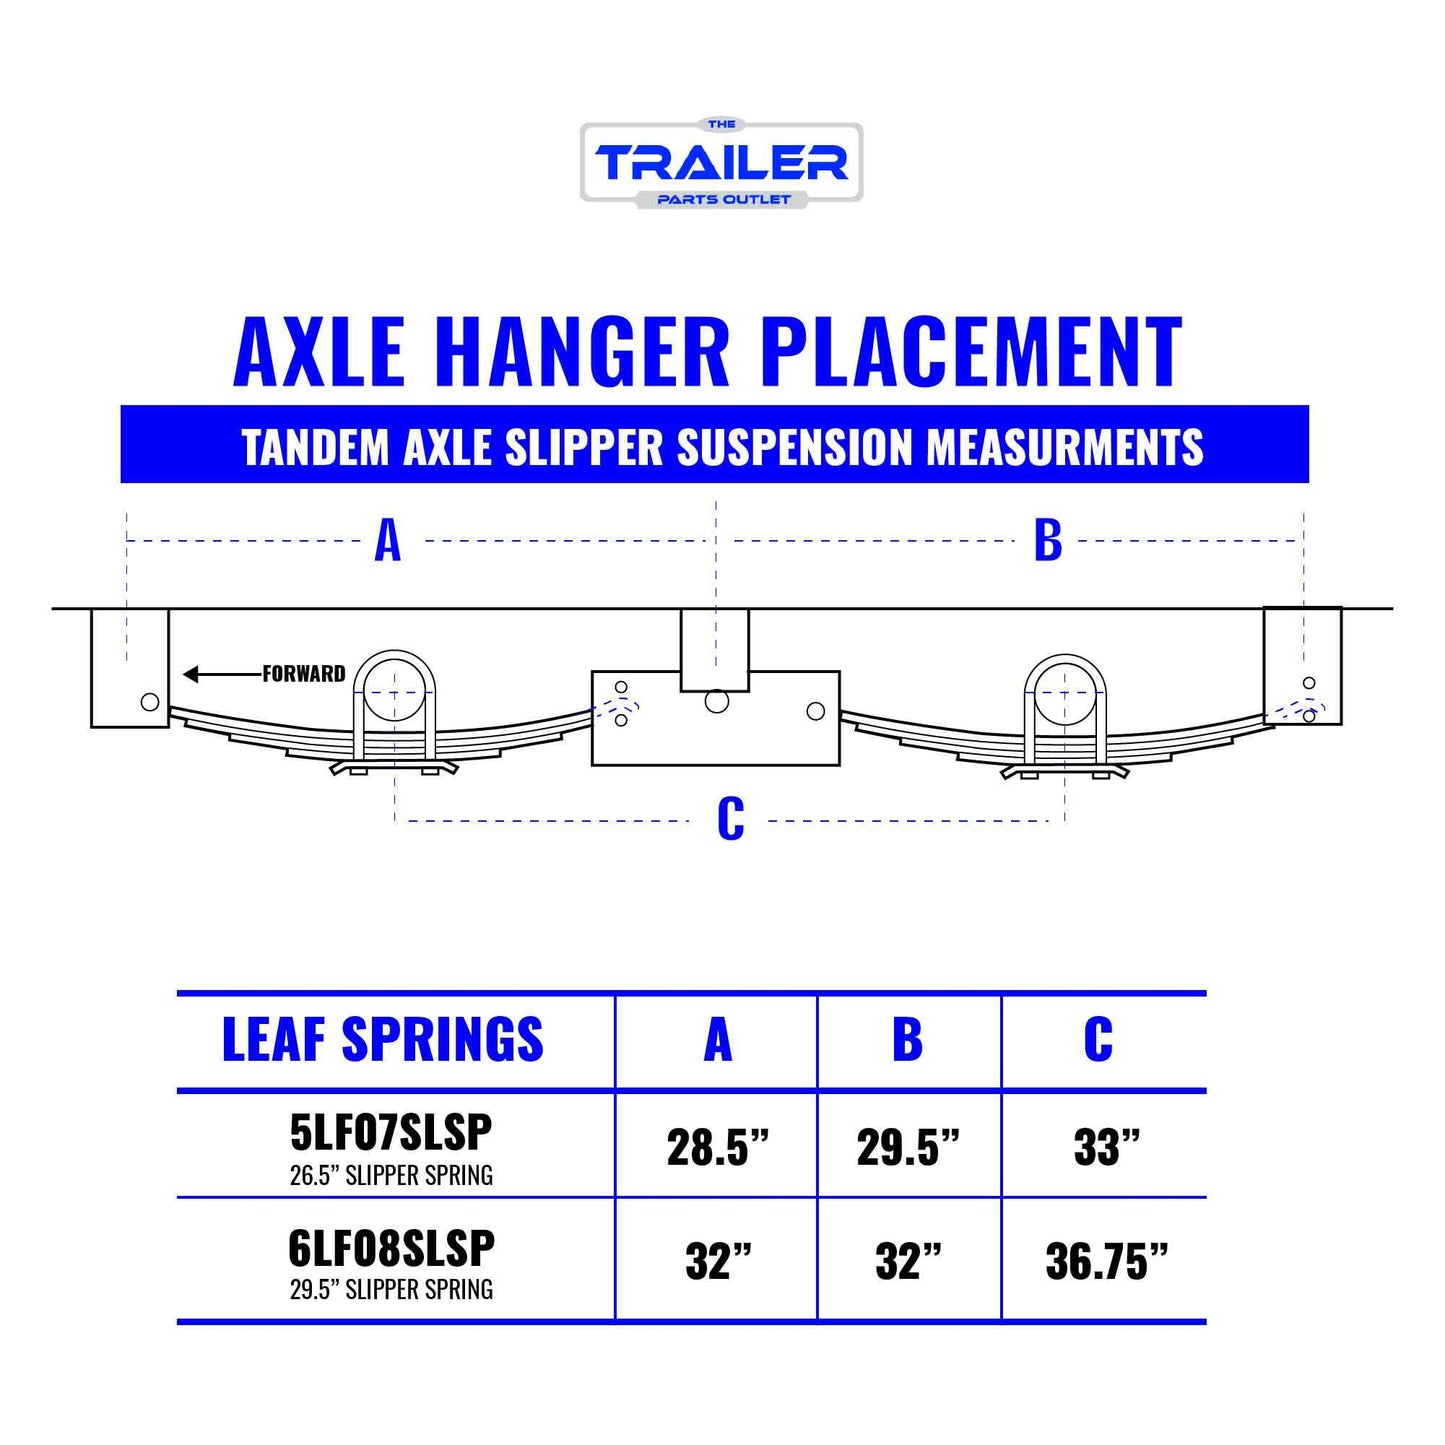 8000 lb TK Hybrid Tandem Axle Bumper Pull Trailer Parts Kit - 16K Capacity HD (Complete Original Series) 9/16" Studs - The Trailer Parts Outlet